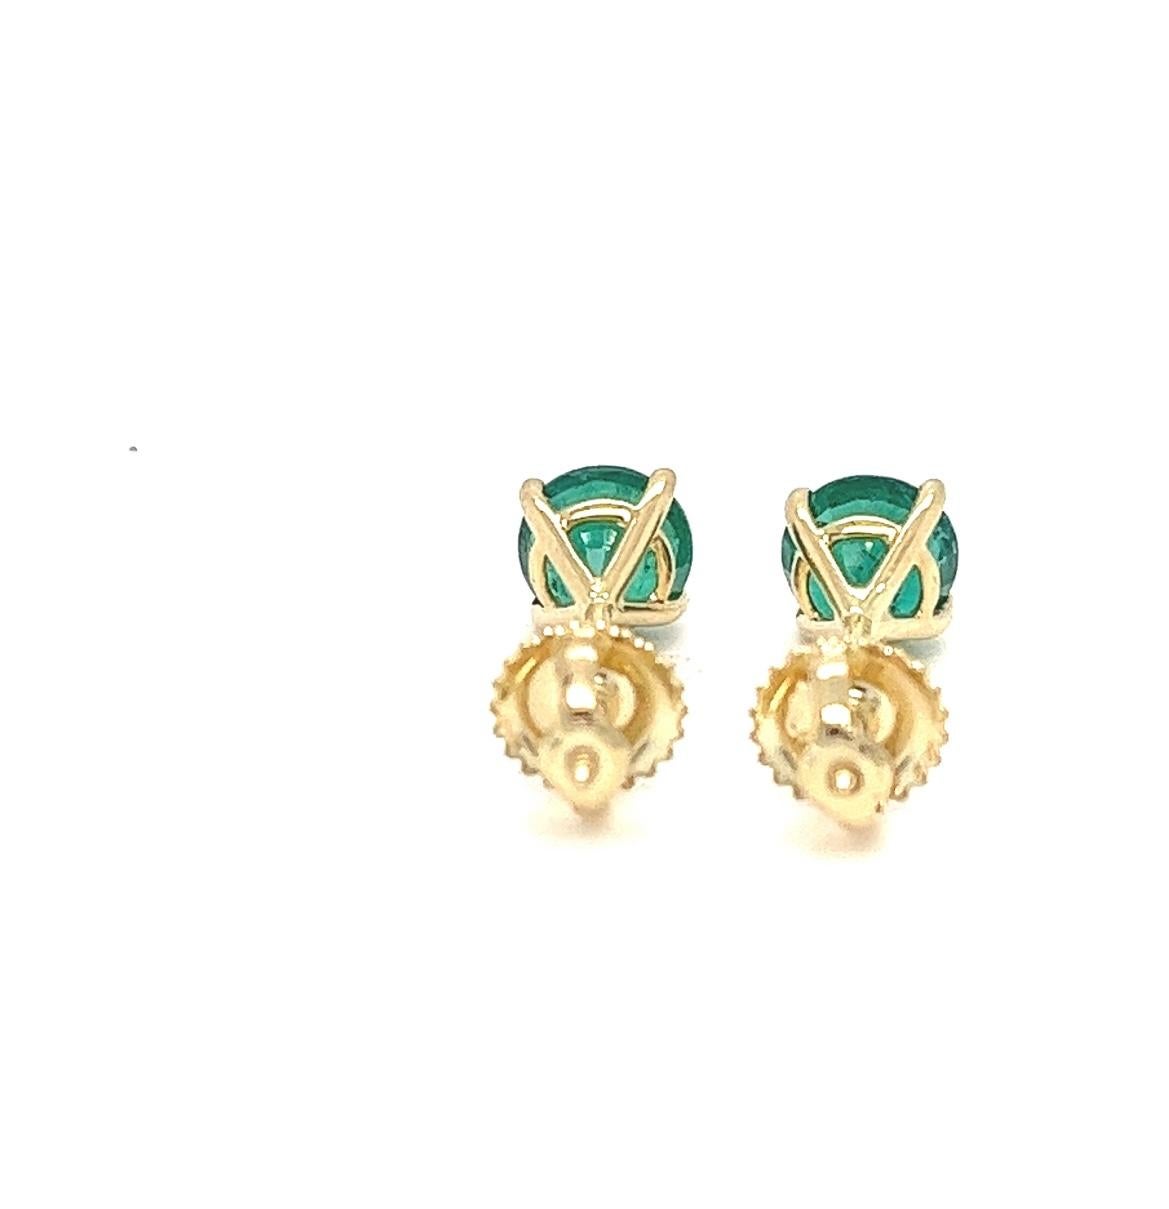 Round Cut 1.31 carats round Emerald Stud Earrings in 14K Yellow Gold. For Sale